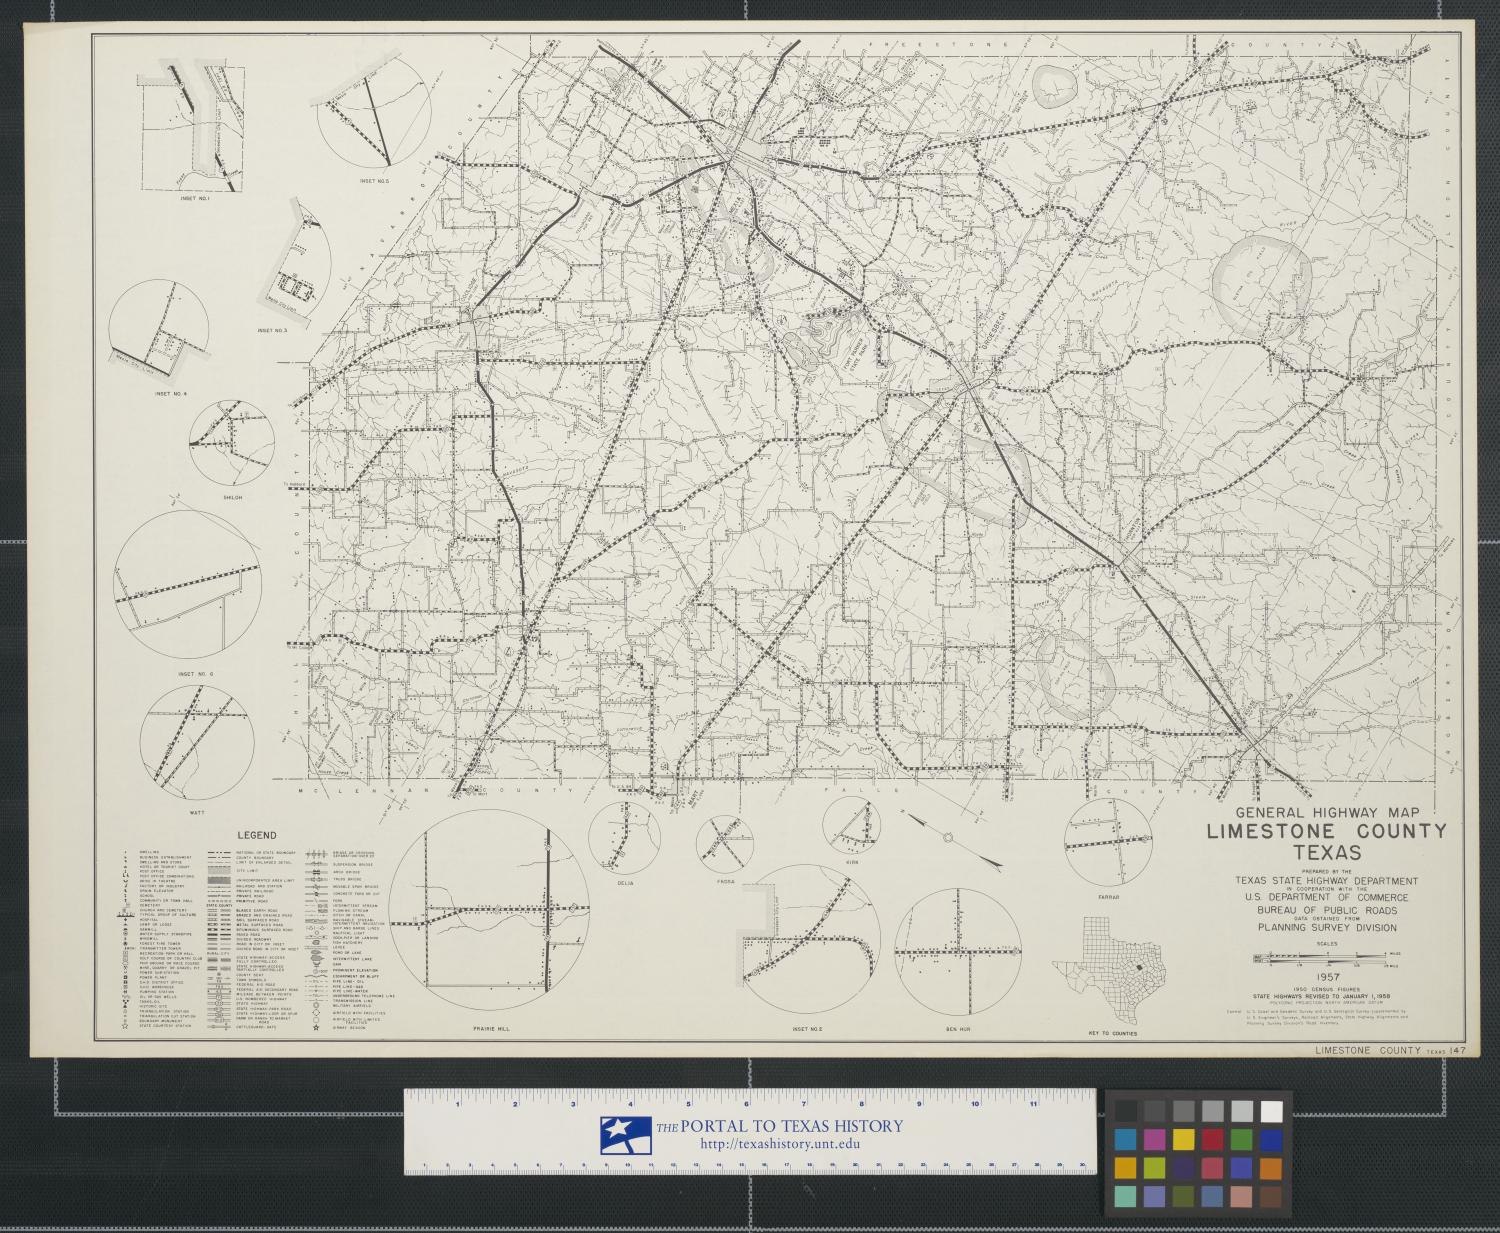 General highway map Limestone County Texas Side 1 of 2 The Portal